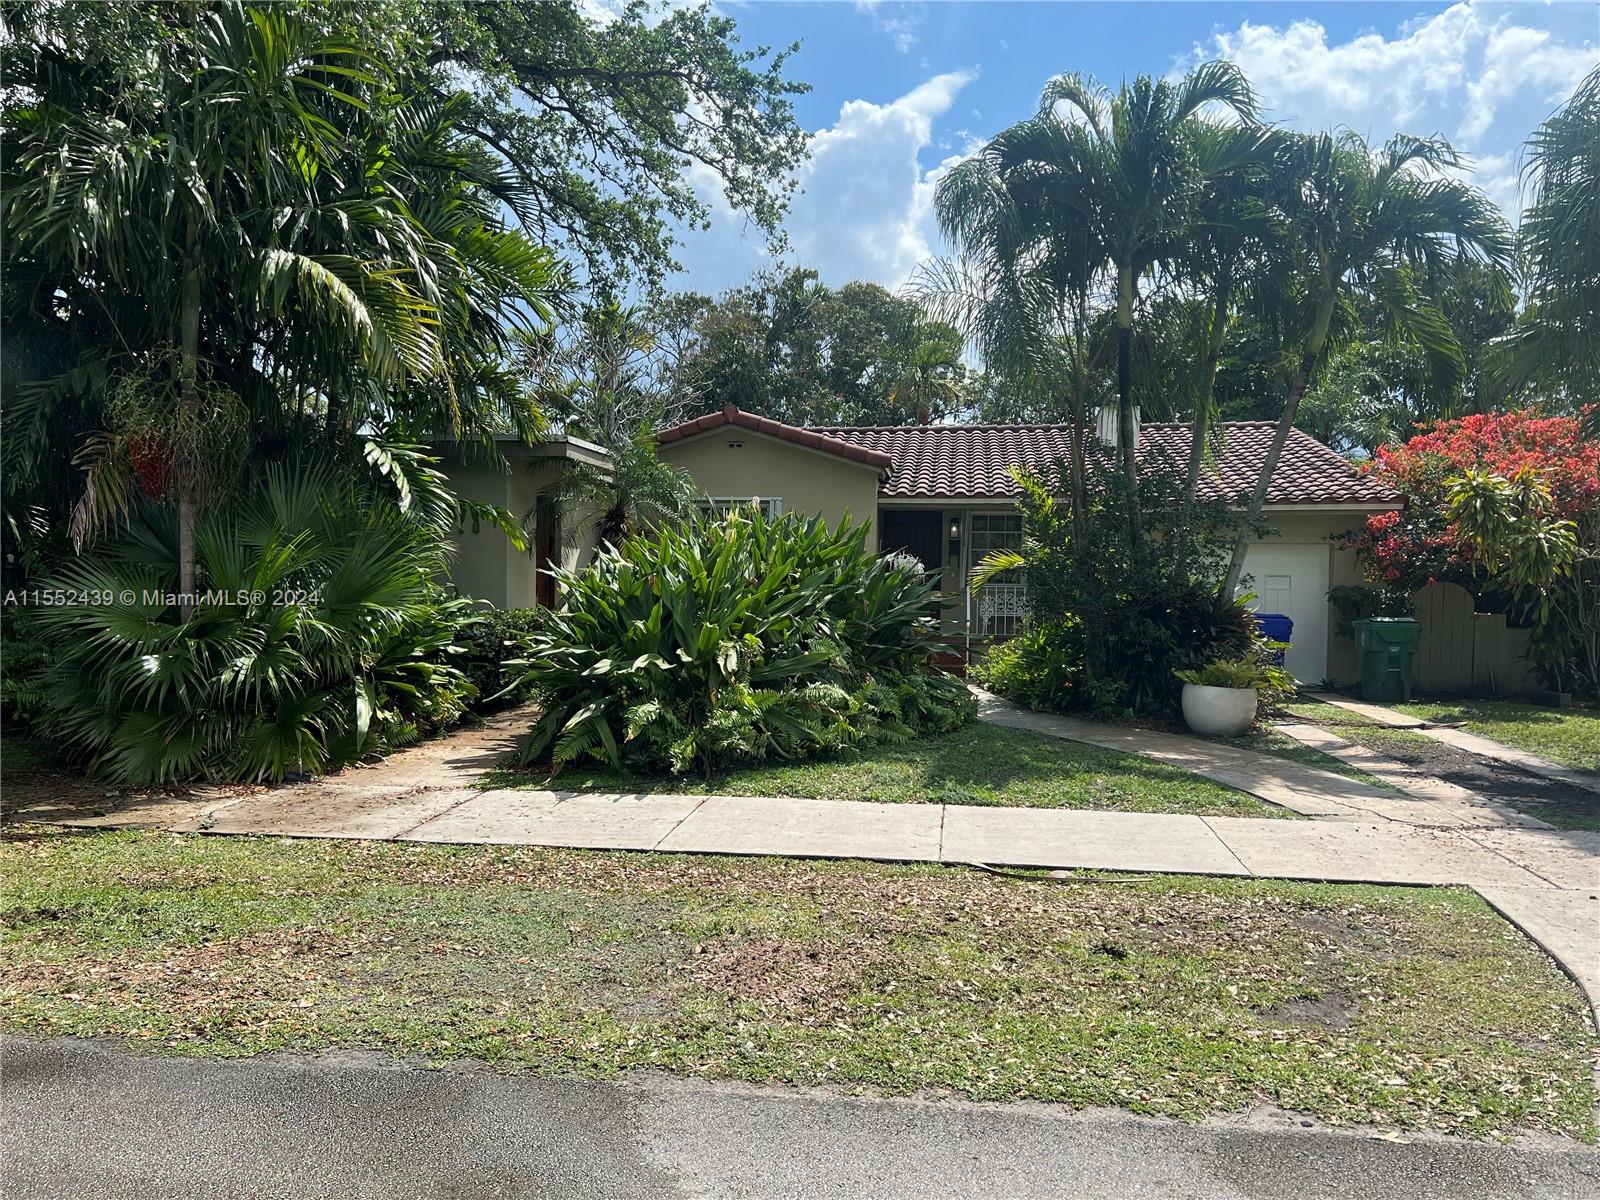 Quaint and cozy home in the heart of Miami. Walking distance to coral gables fine dining and entertainment. This property features 3 bedrooms with 2 bathrooms and a den. One bedroom/bathroom offers private entrance. Perfect for a family or investor. This home has two living areas, dining, kitchen and closed in garage for all your storage needs. Huge backyard with endless possibilities for pool or beautiful oasis. Large mature avocado tree on property. Don't miss your chance to move into this gem of a neighborhood!